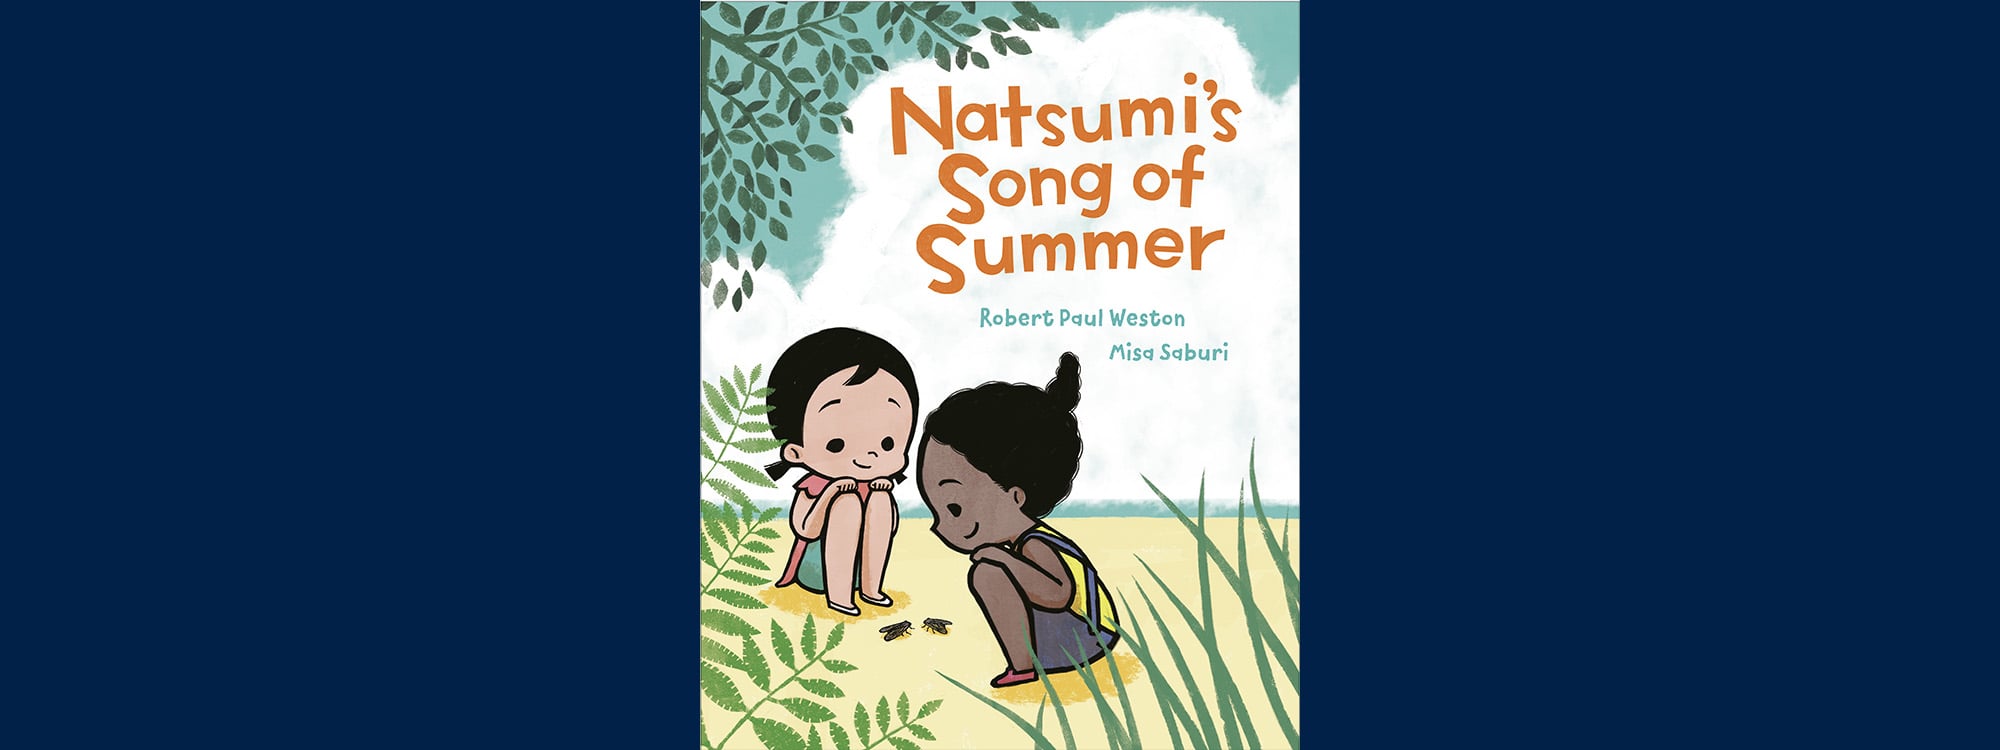 A book cover with two cartoon children playing